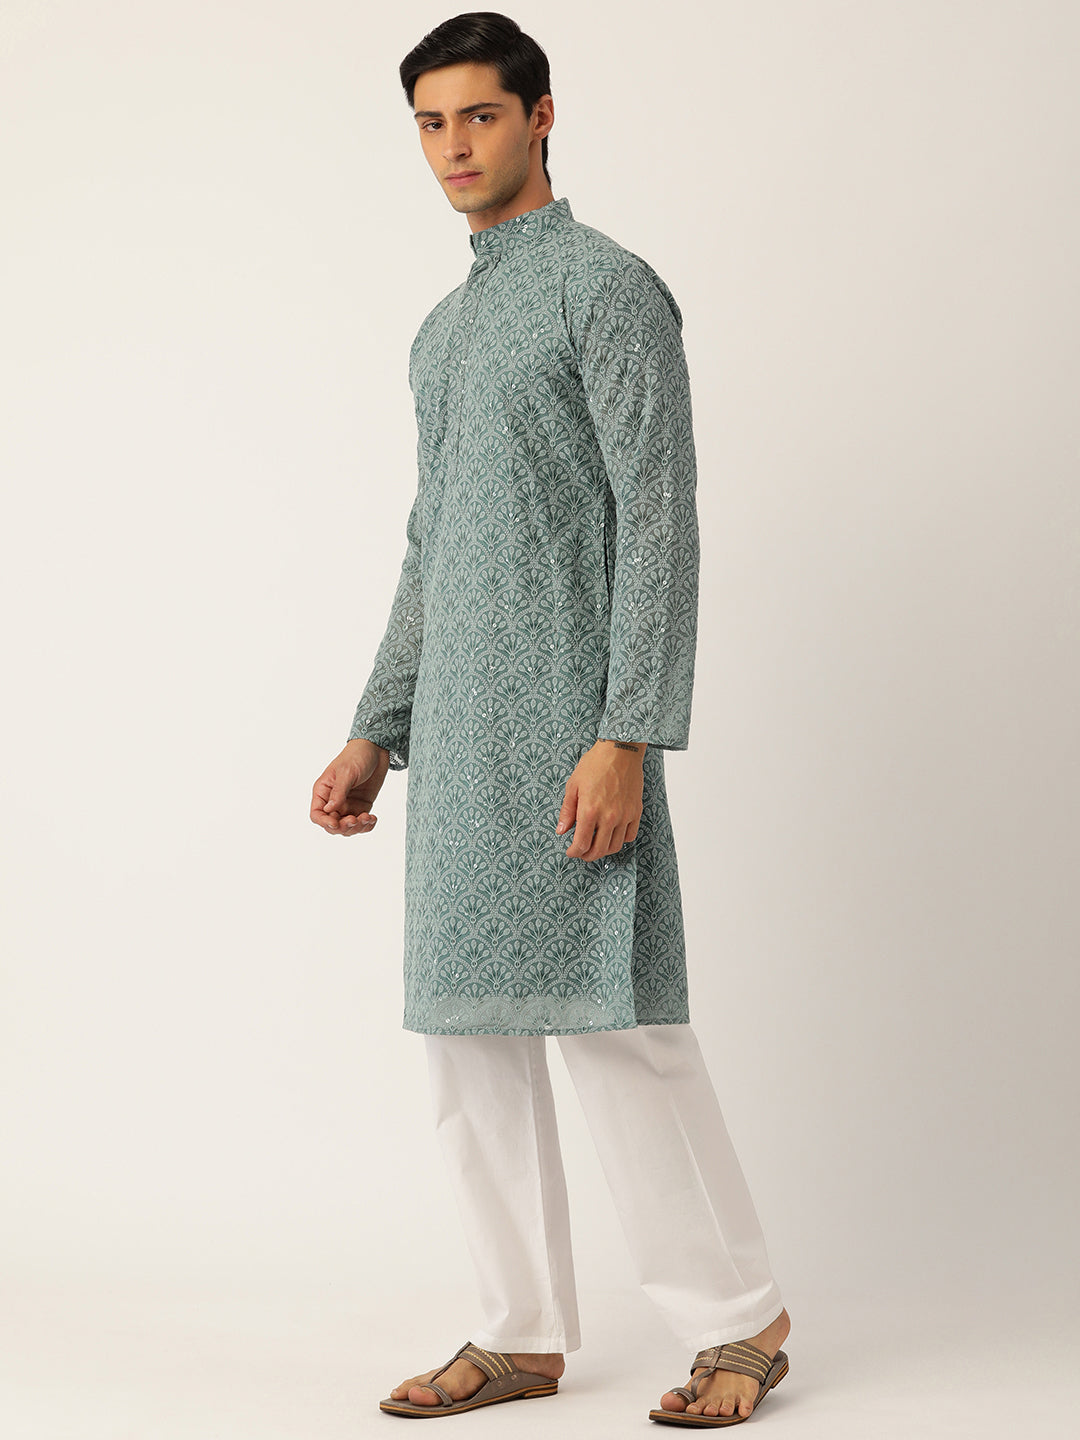 TURQUOISE BLUE GEORGETTE EMBROIDERED MEN\'S KURTA